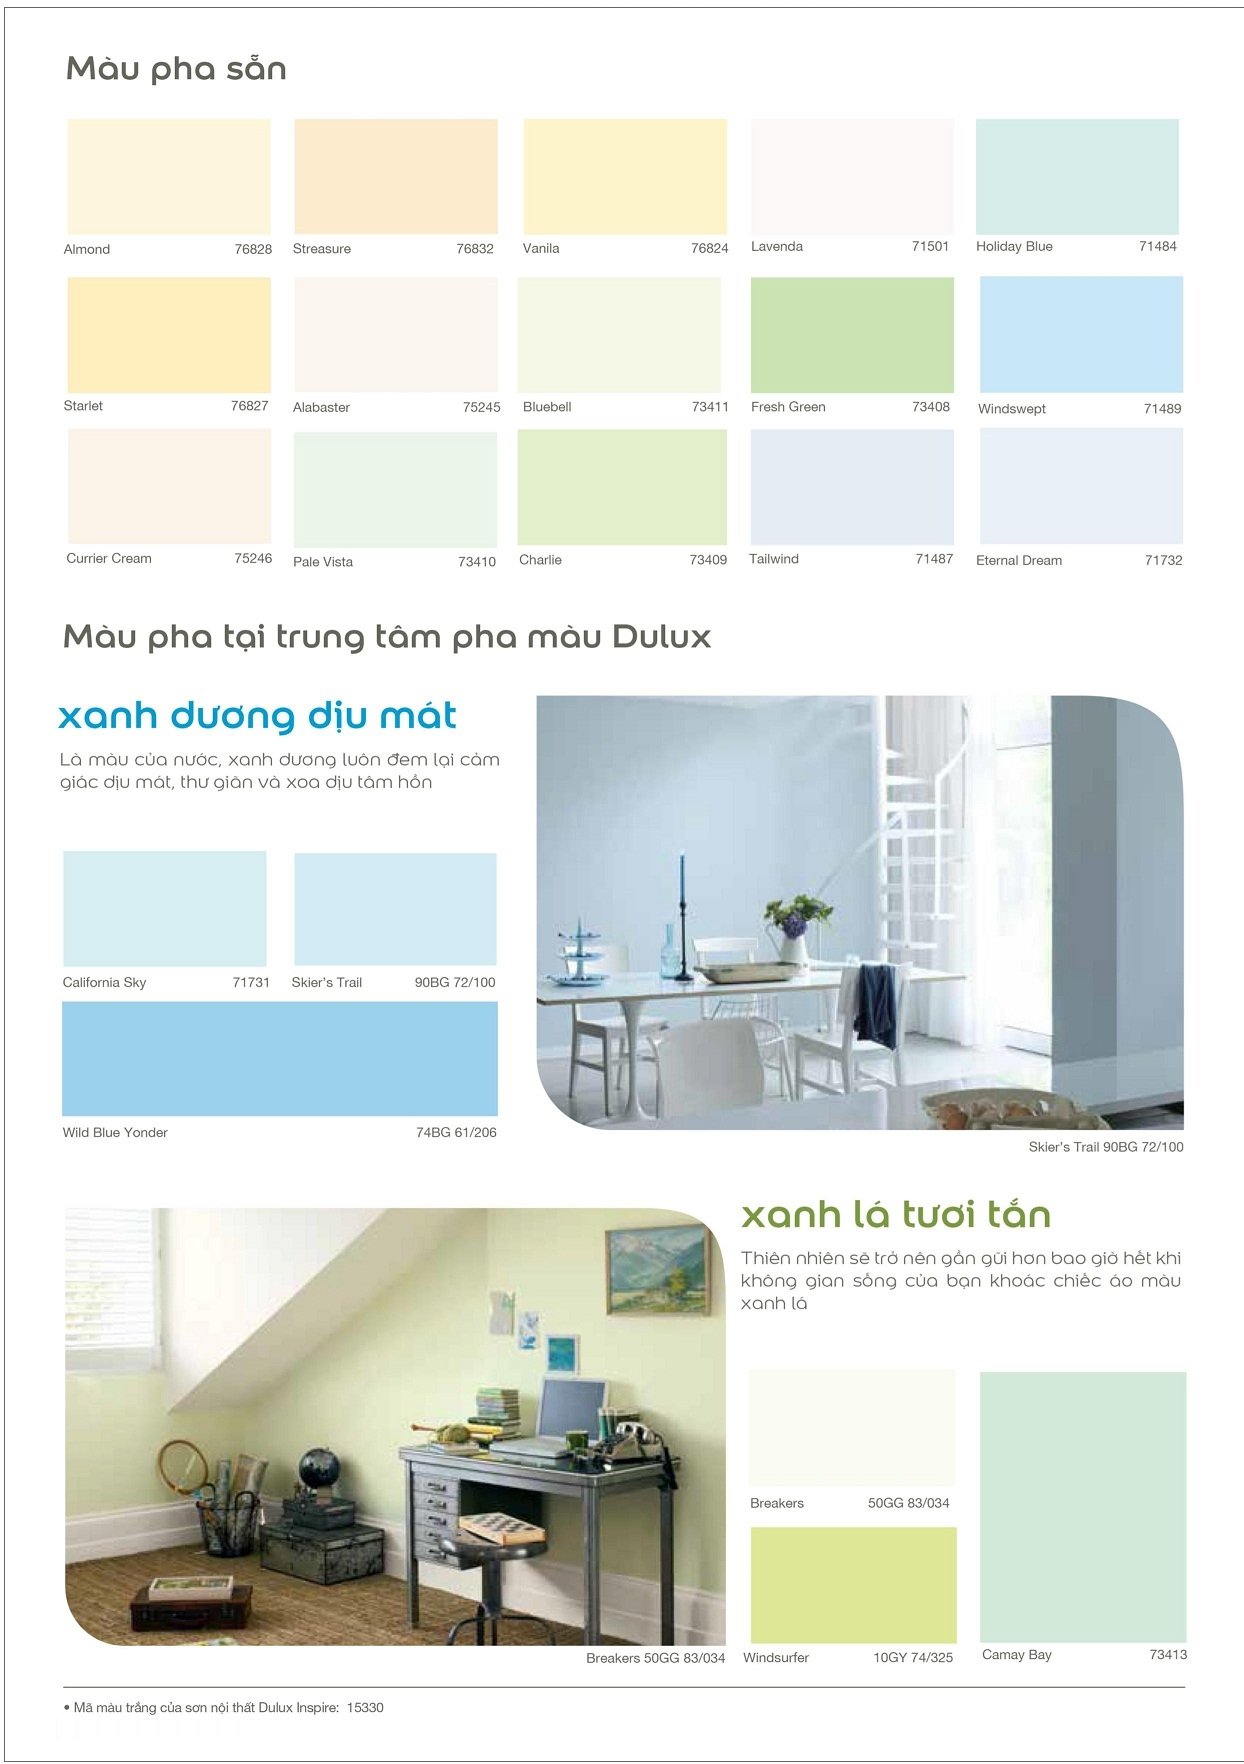 son-mai-anh-bang-mau-son-nuoc-dulux-trong-nha-dulux-inspire-y53-3